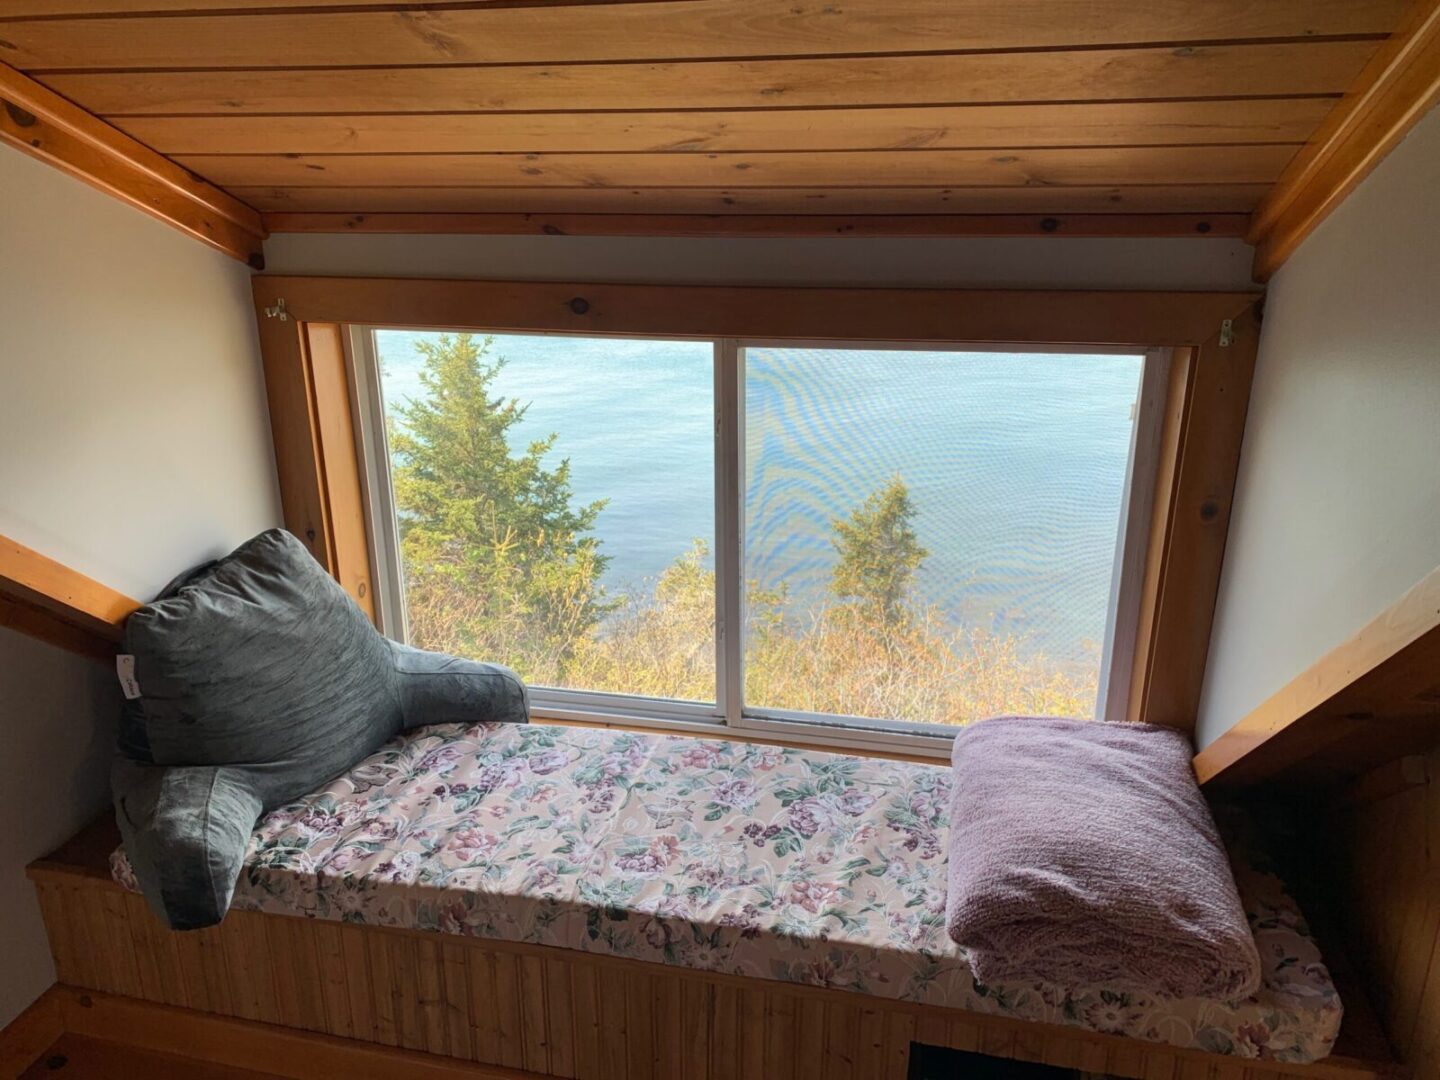 A window seat in a room with a view of the ocean.